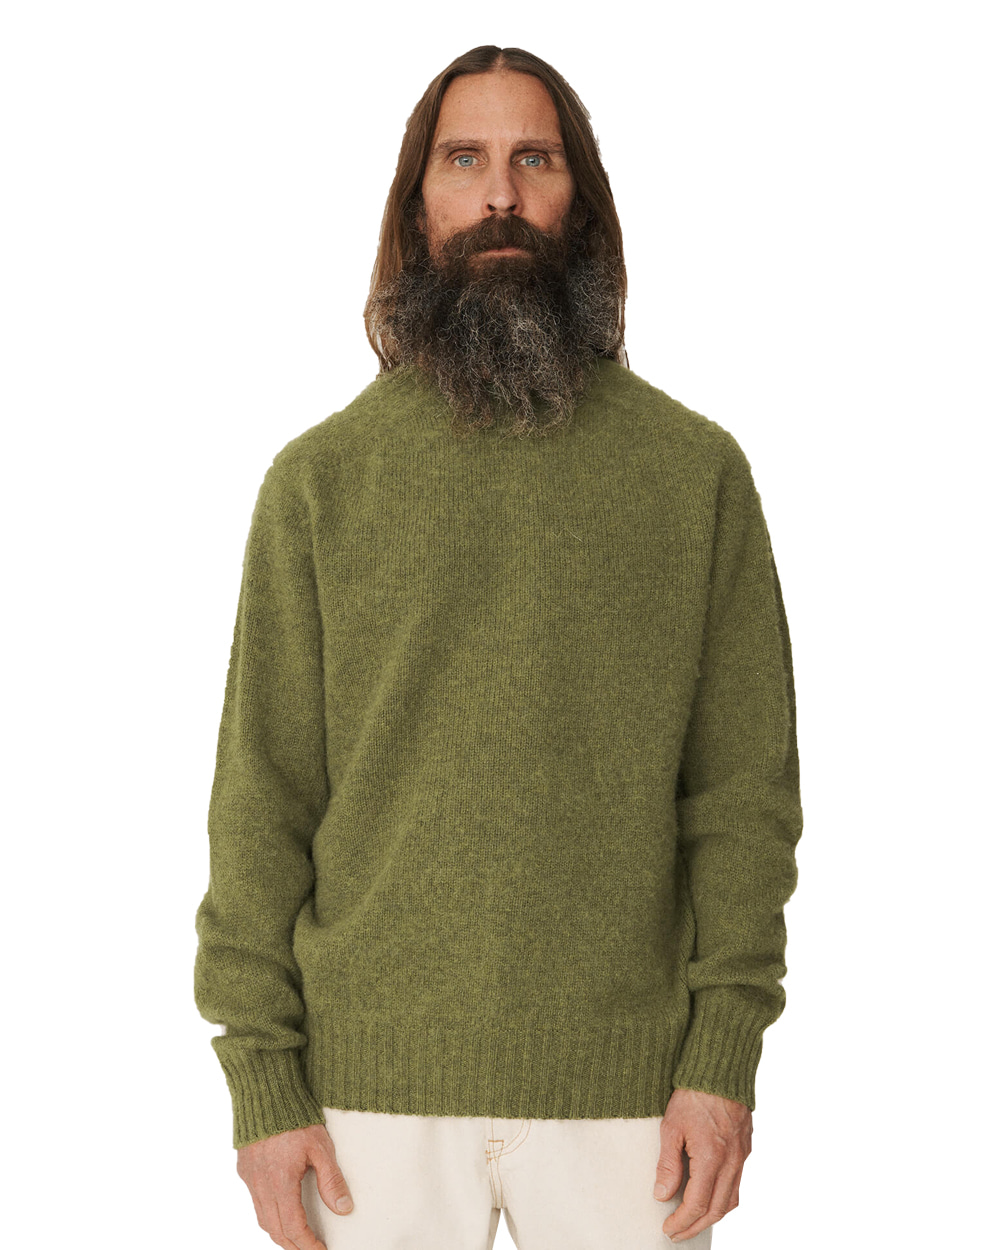 Suedehead Crew Neck Knit (Olive)